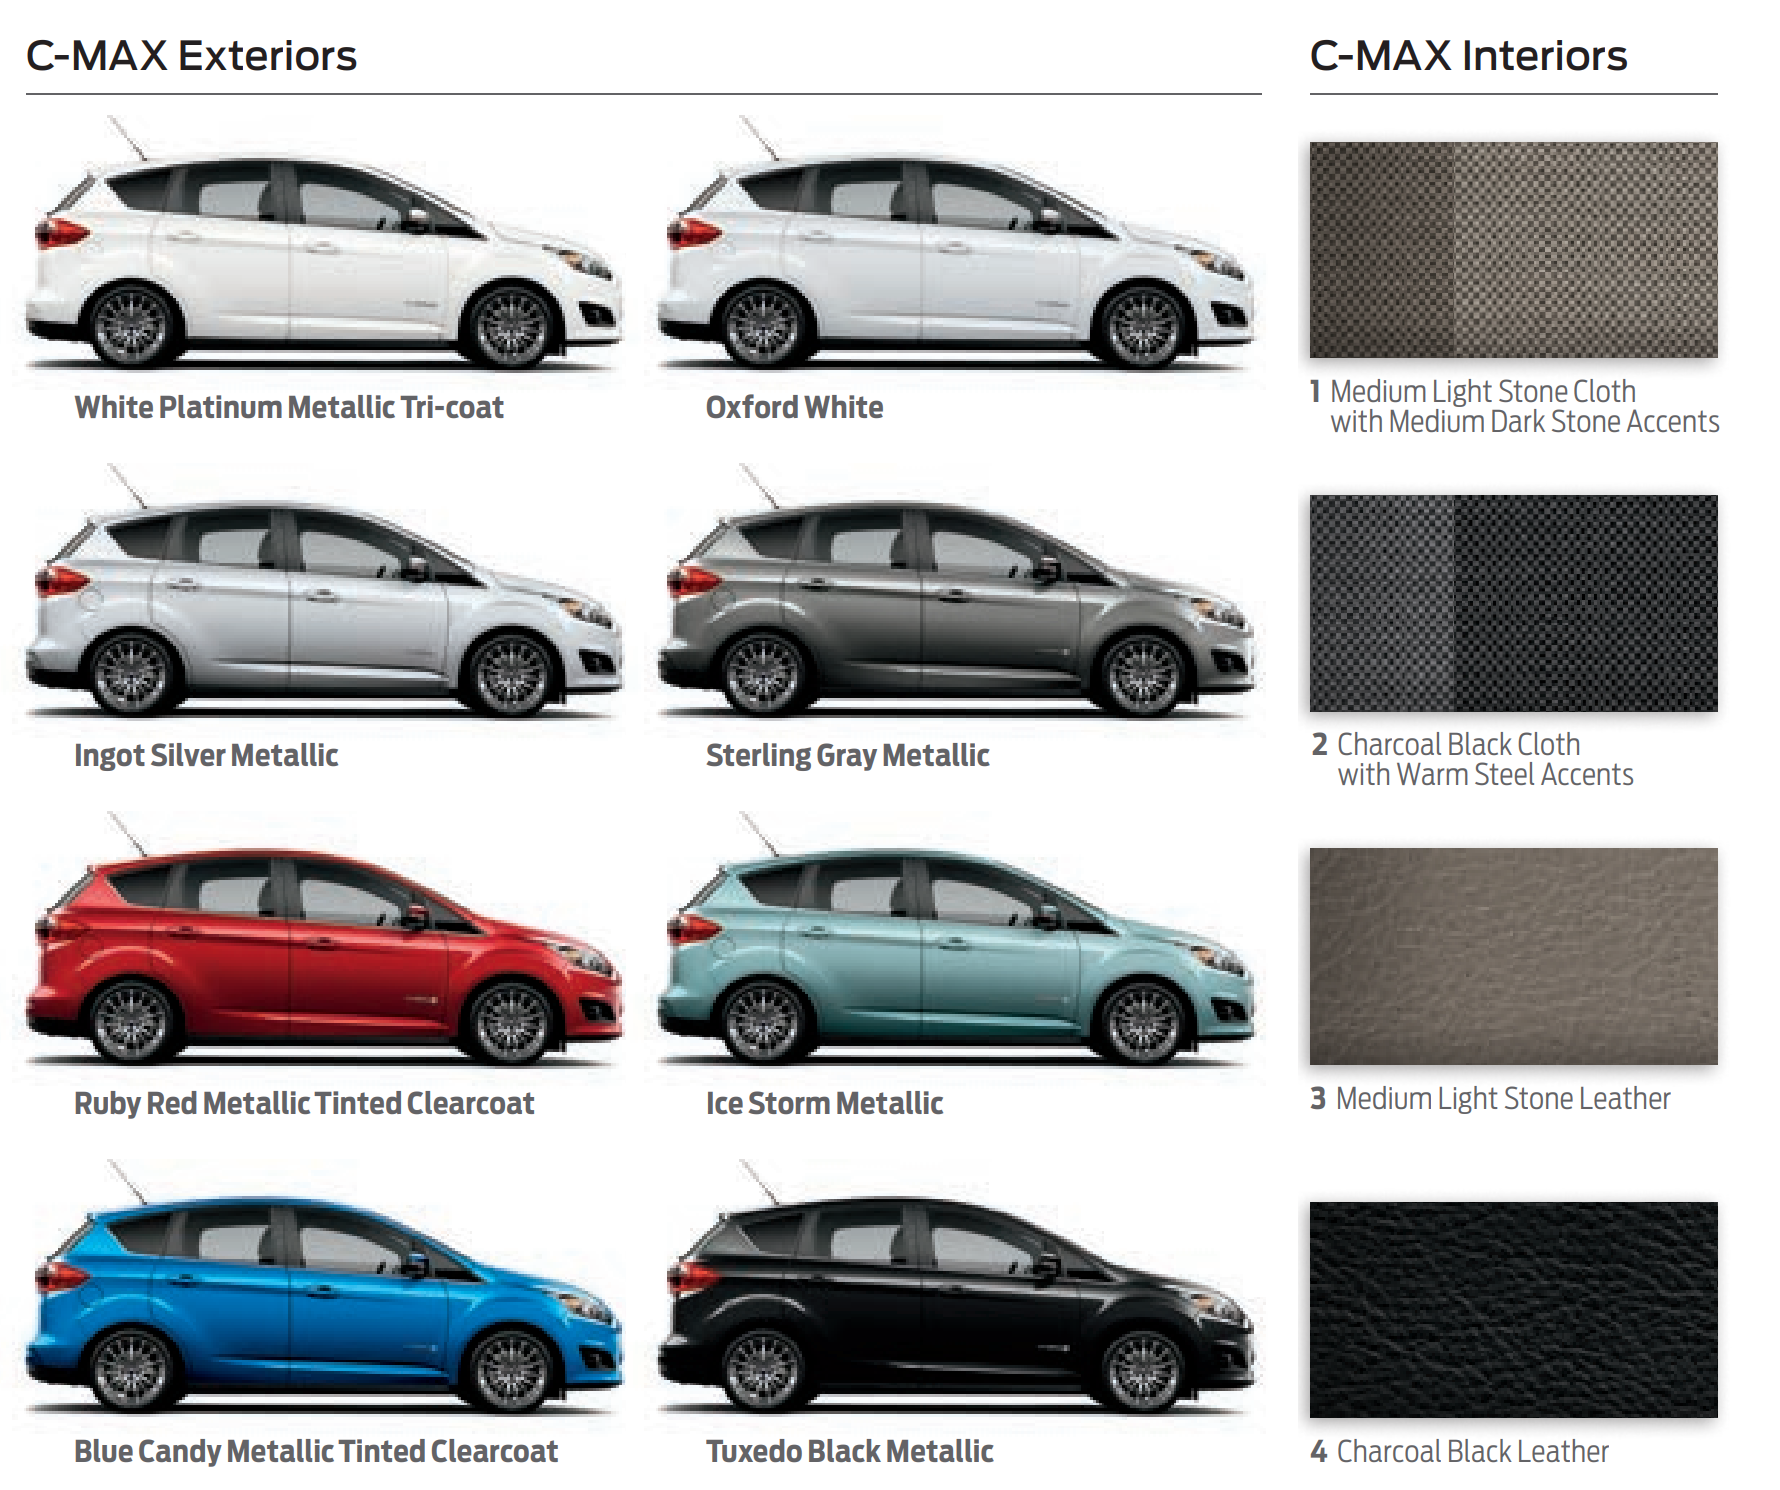 A picture showing exterior and interior paint samples for the 2014 Ford C-max vehicles